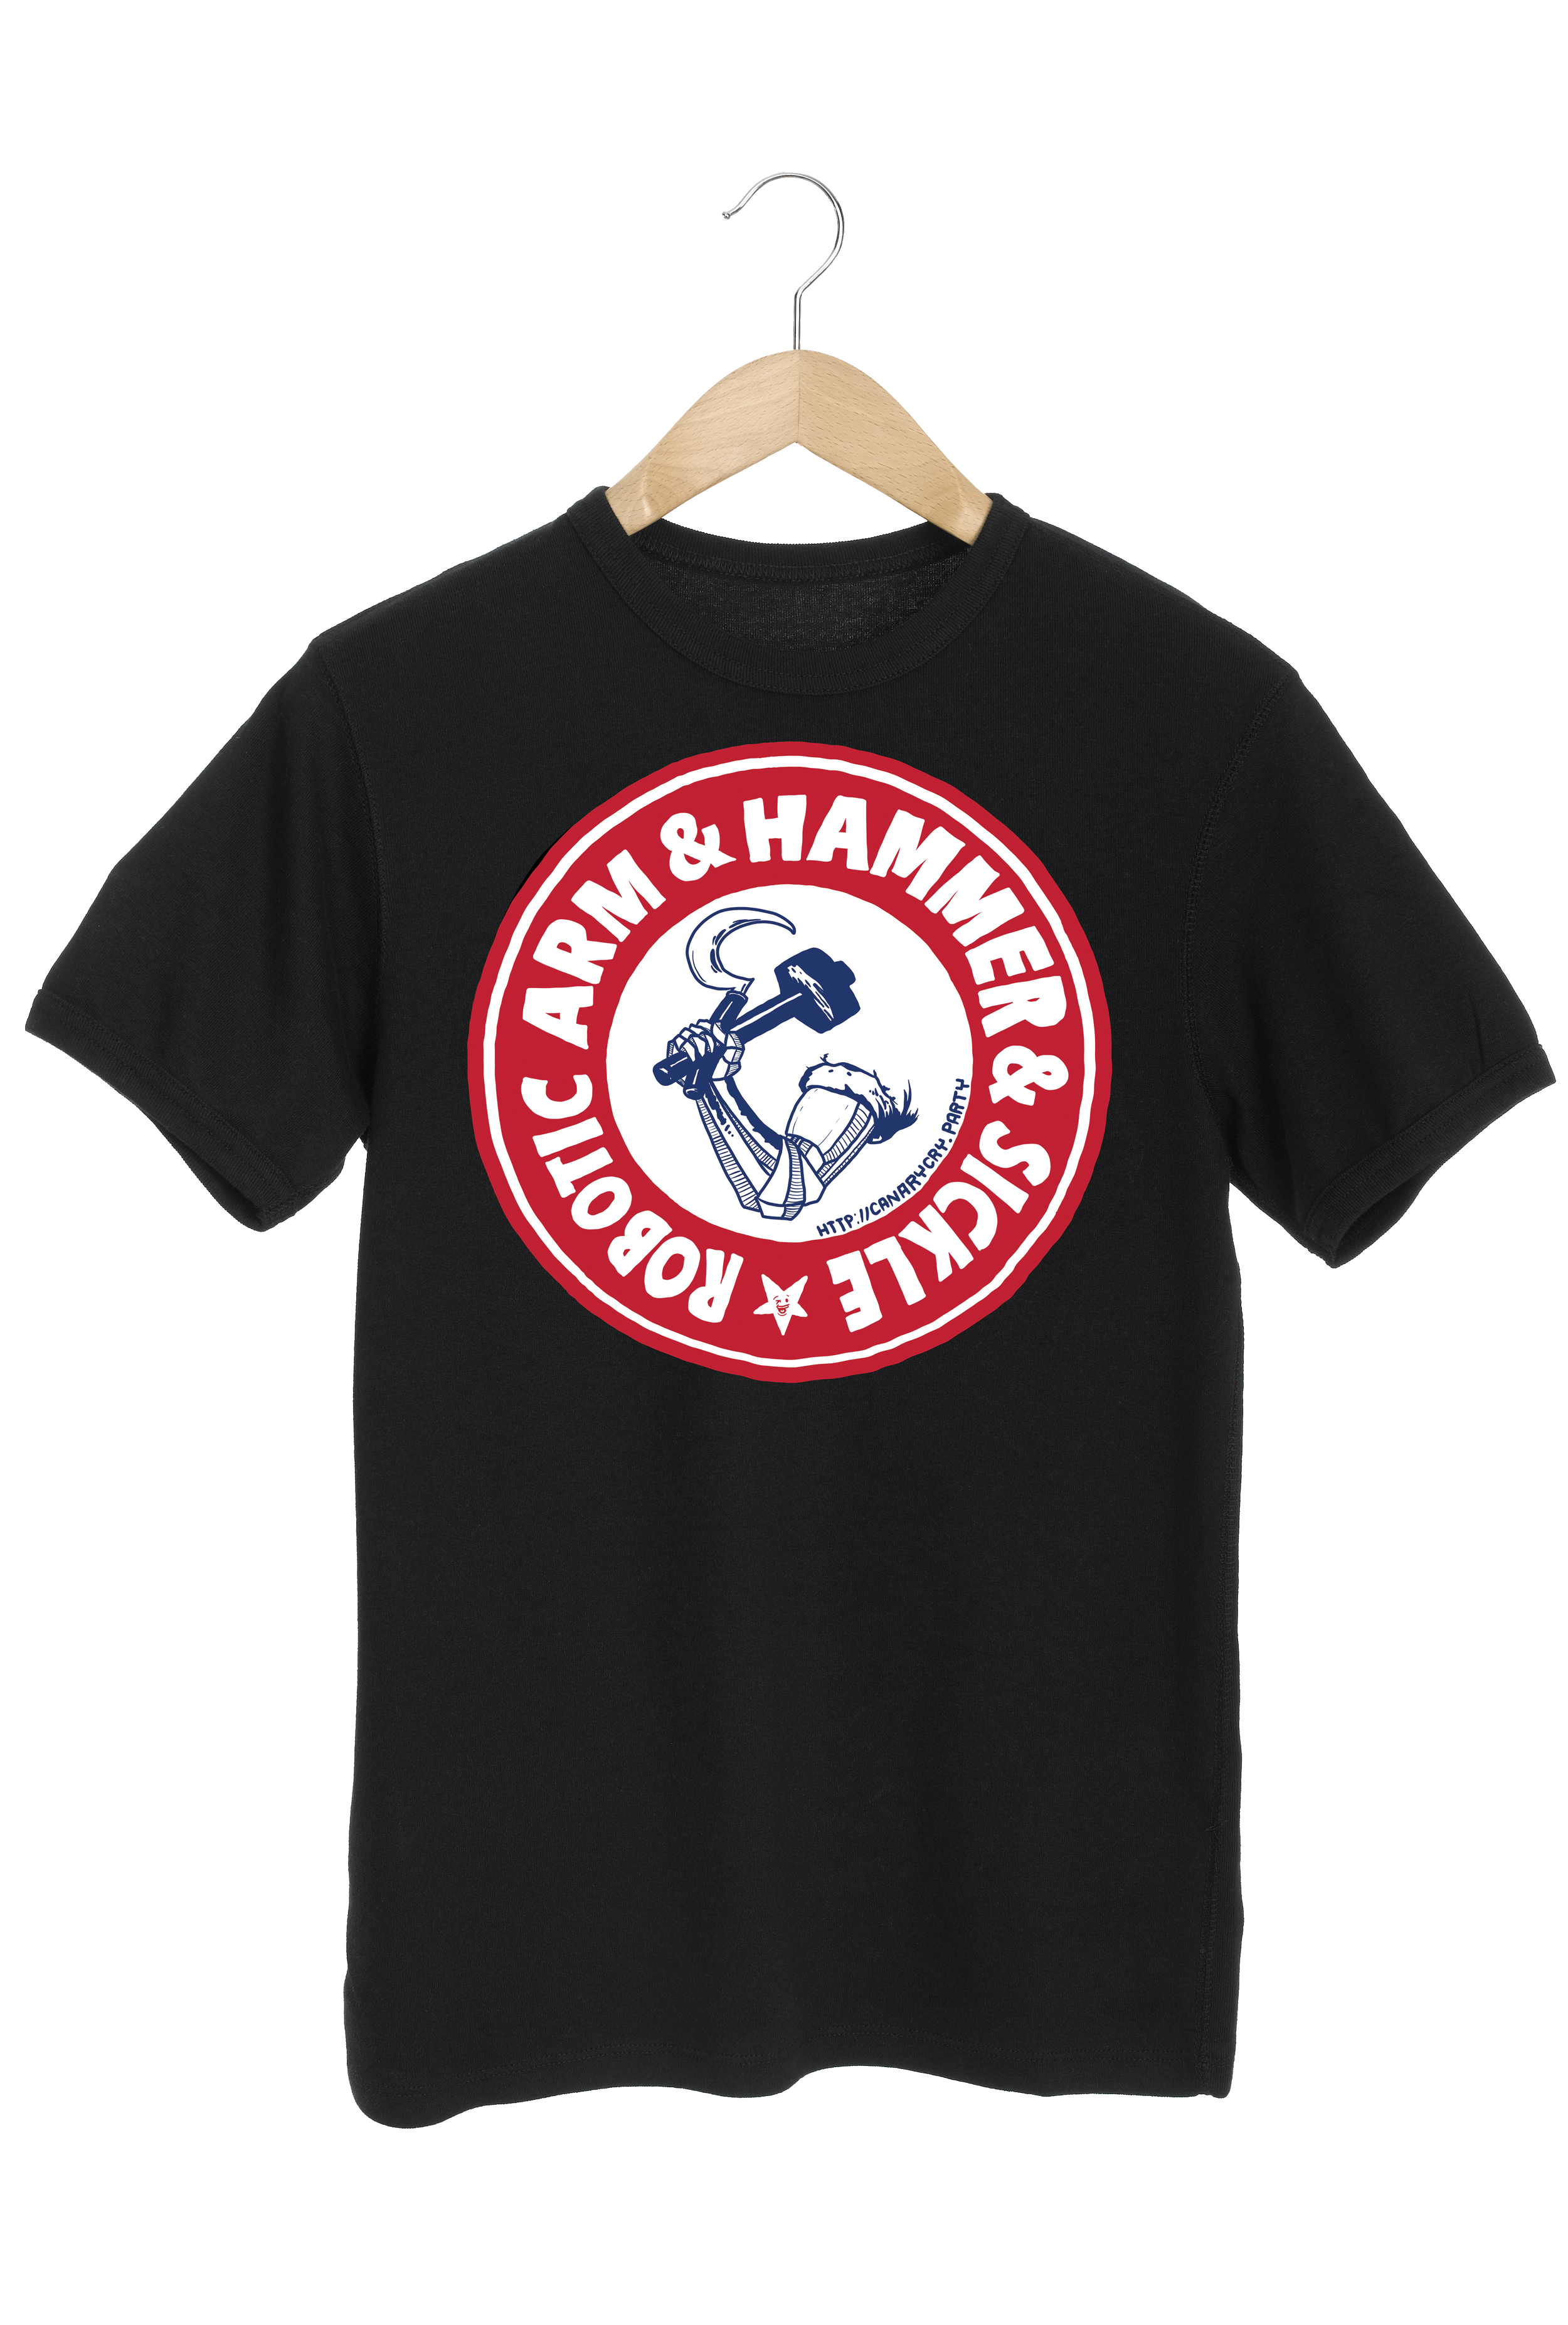 arm and hammer shirt 2mb.png